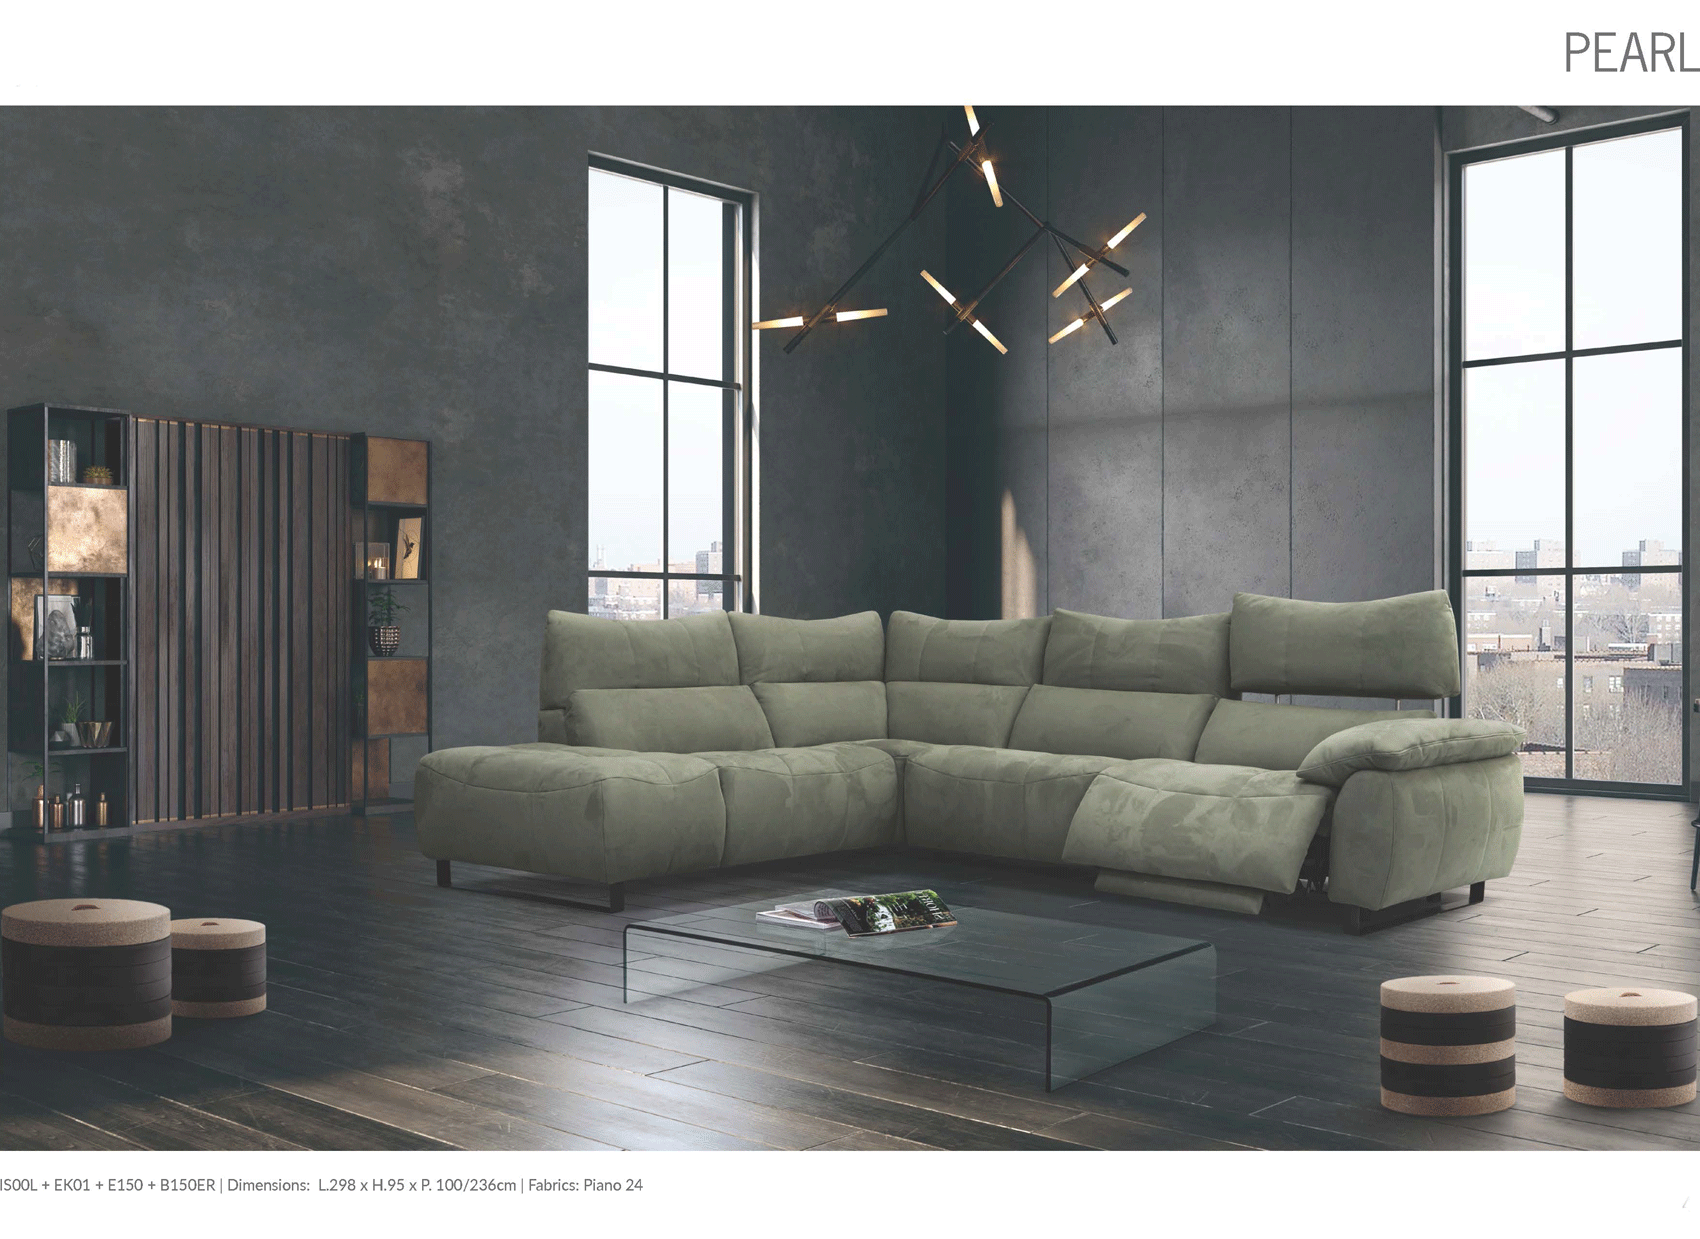 Living Room Furniture Sleepers Sofas Loveseats and Chairs Pearl Sectional